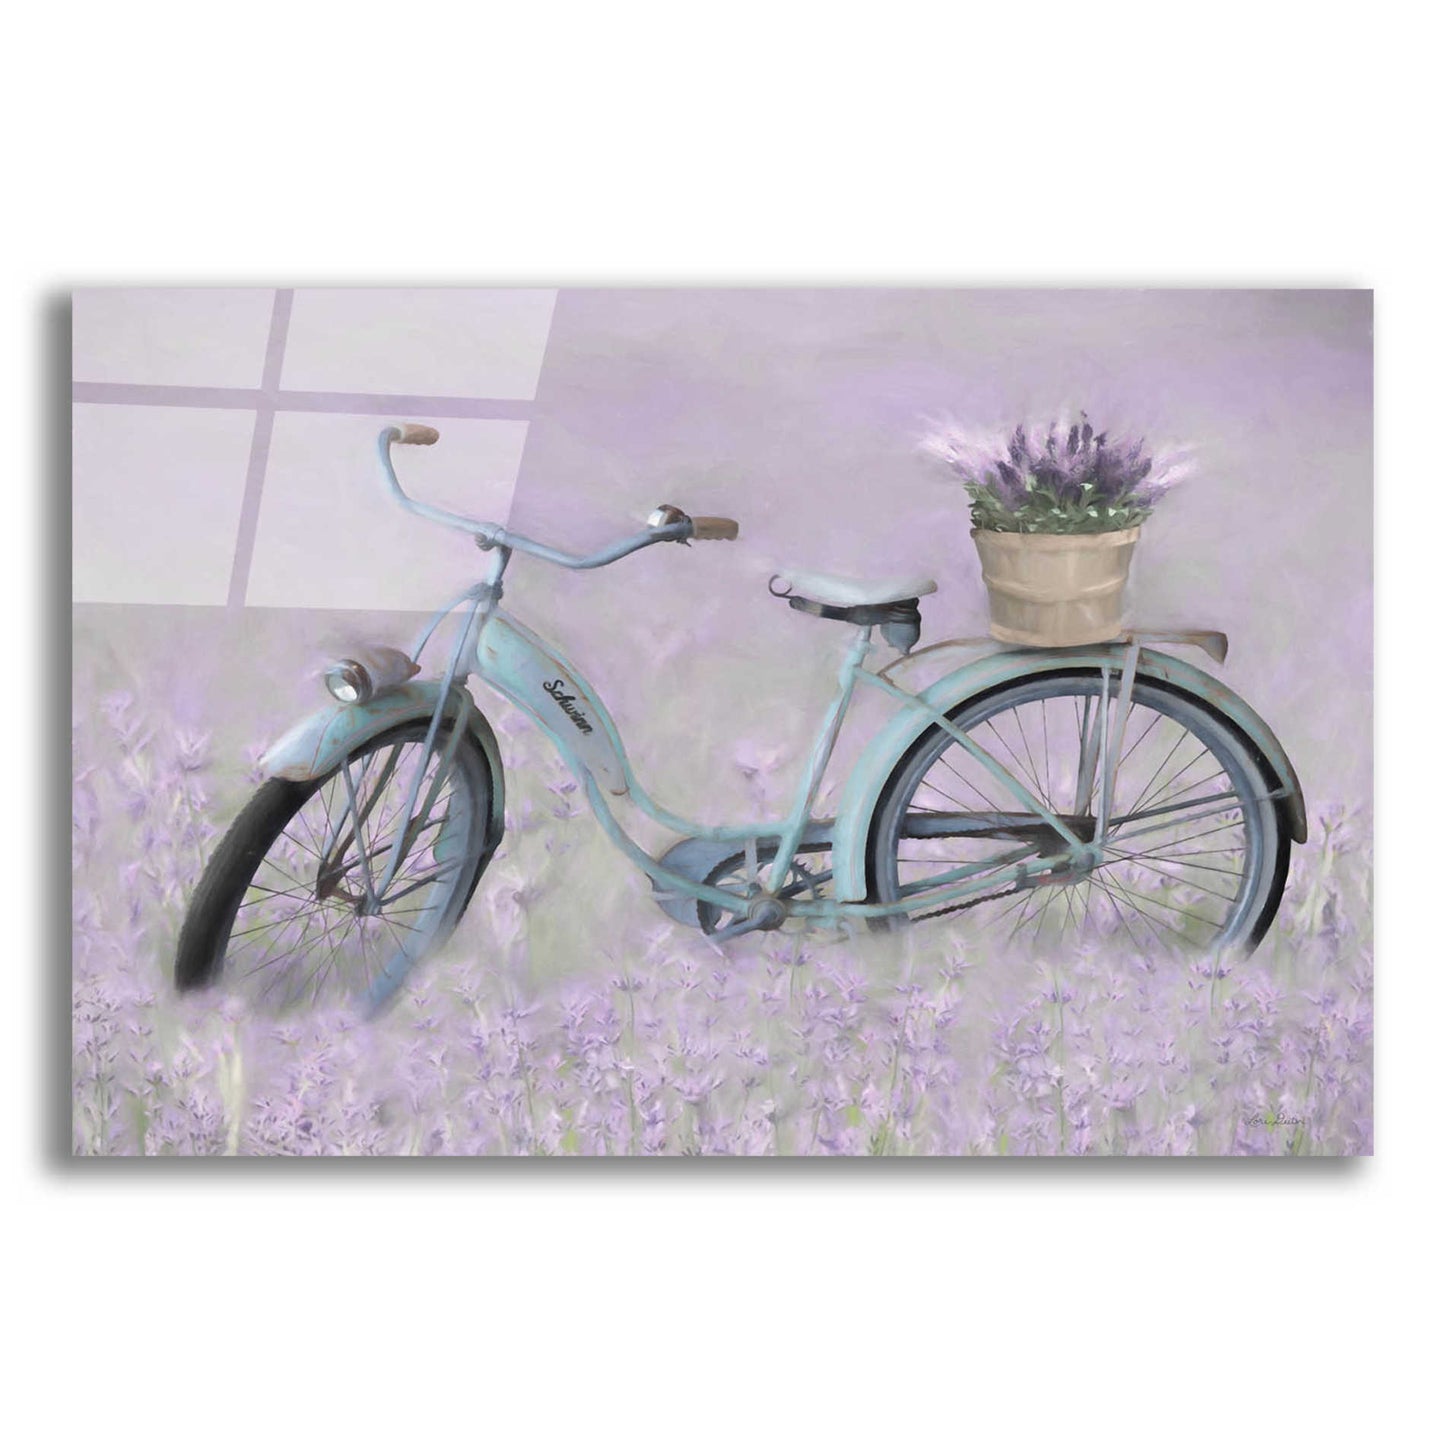 Epic Art 'Bicycle in Lavender' by Lori Deiter Acrylic Glass Wall Art,24x16